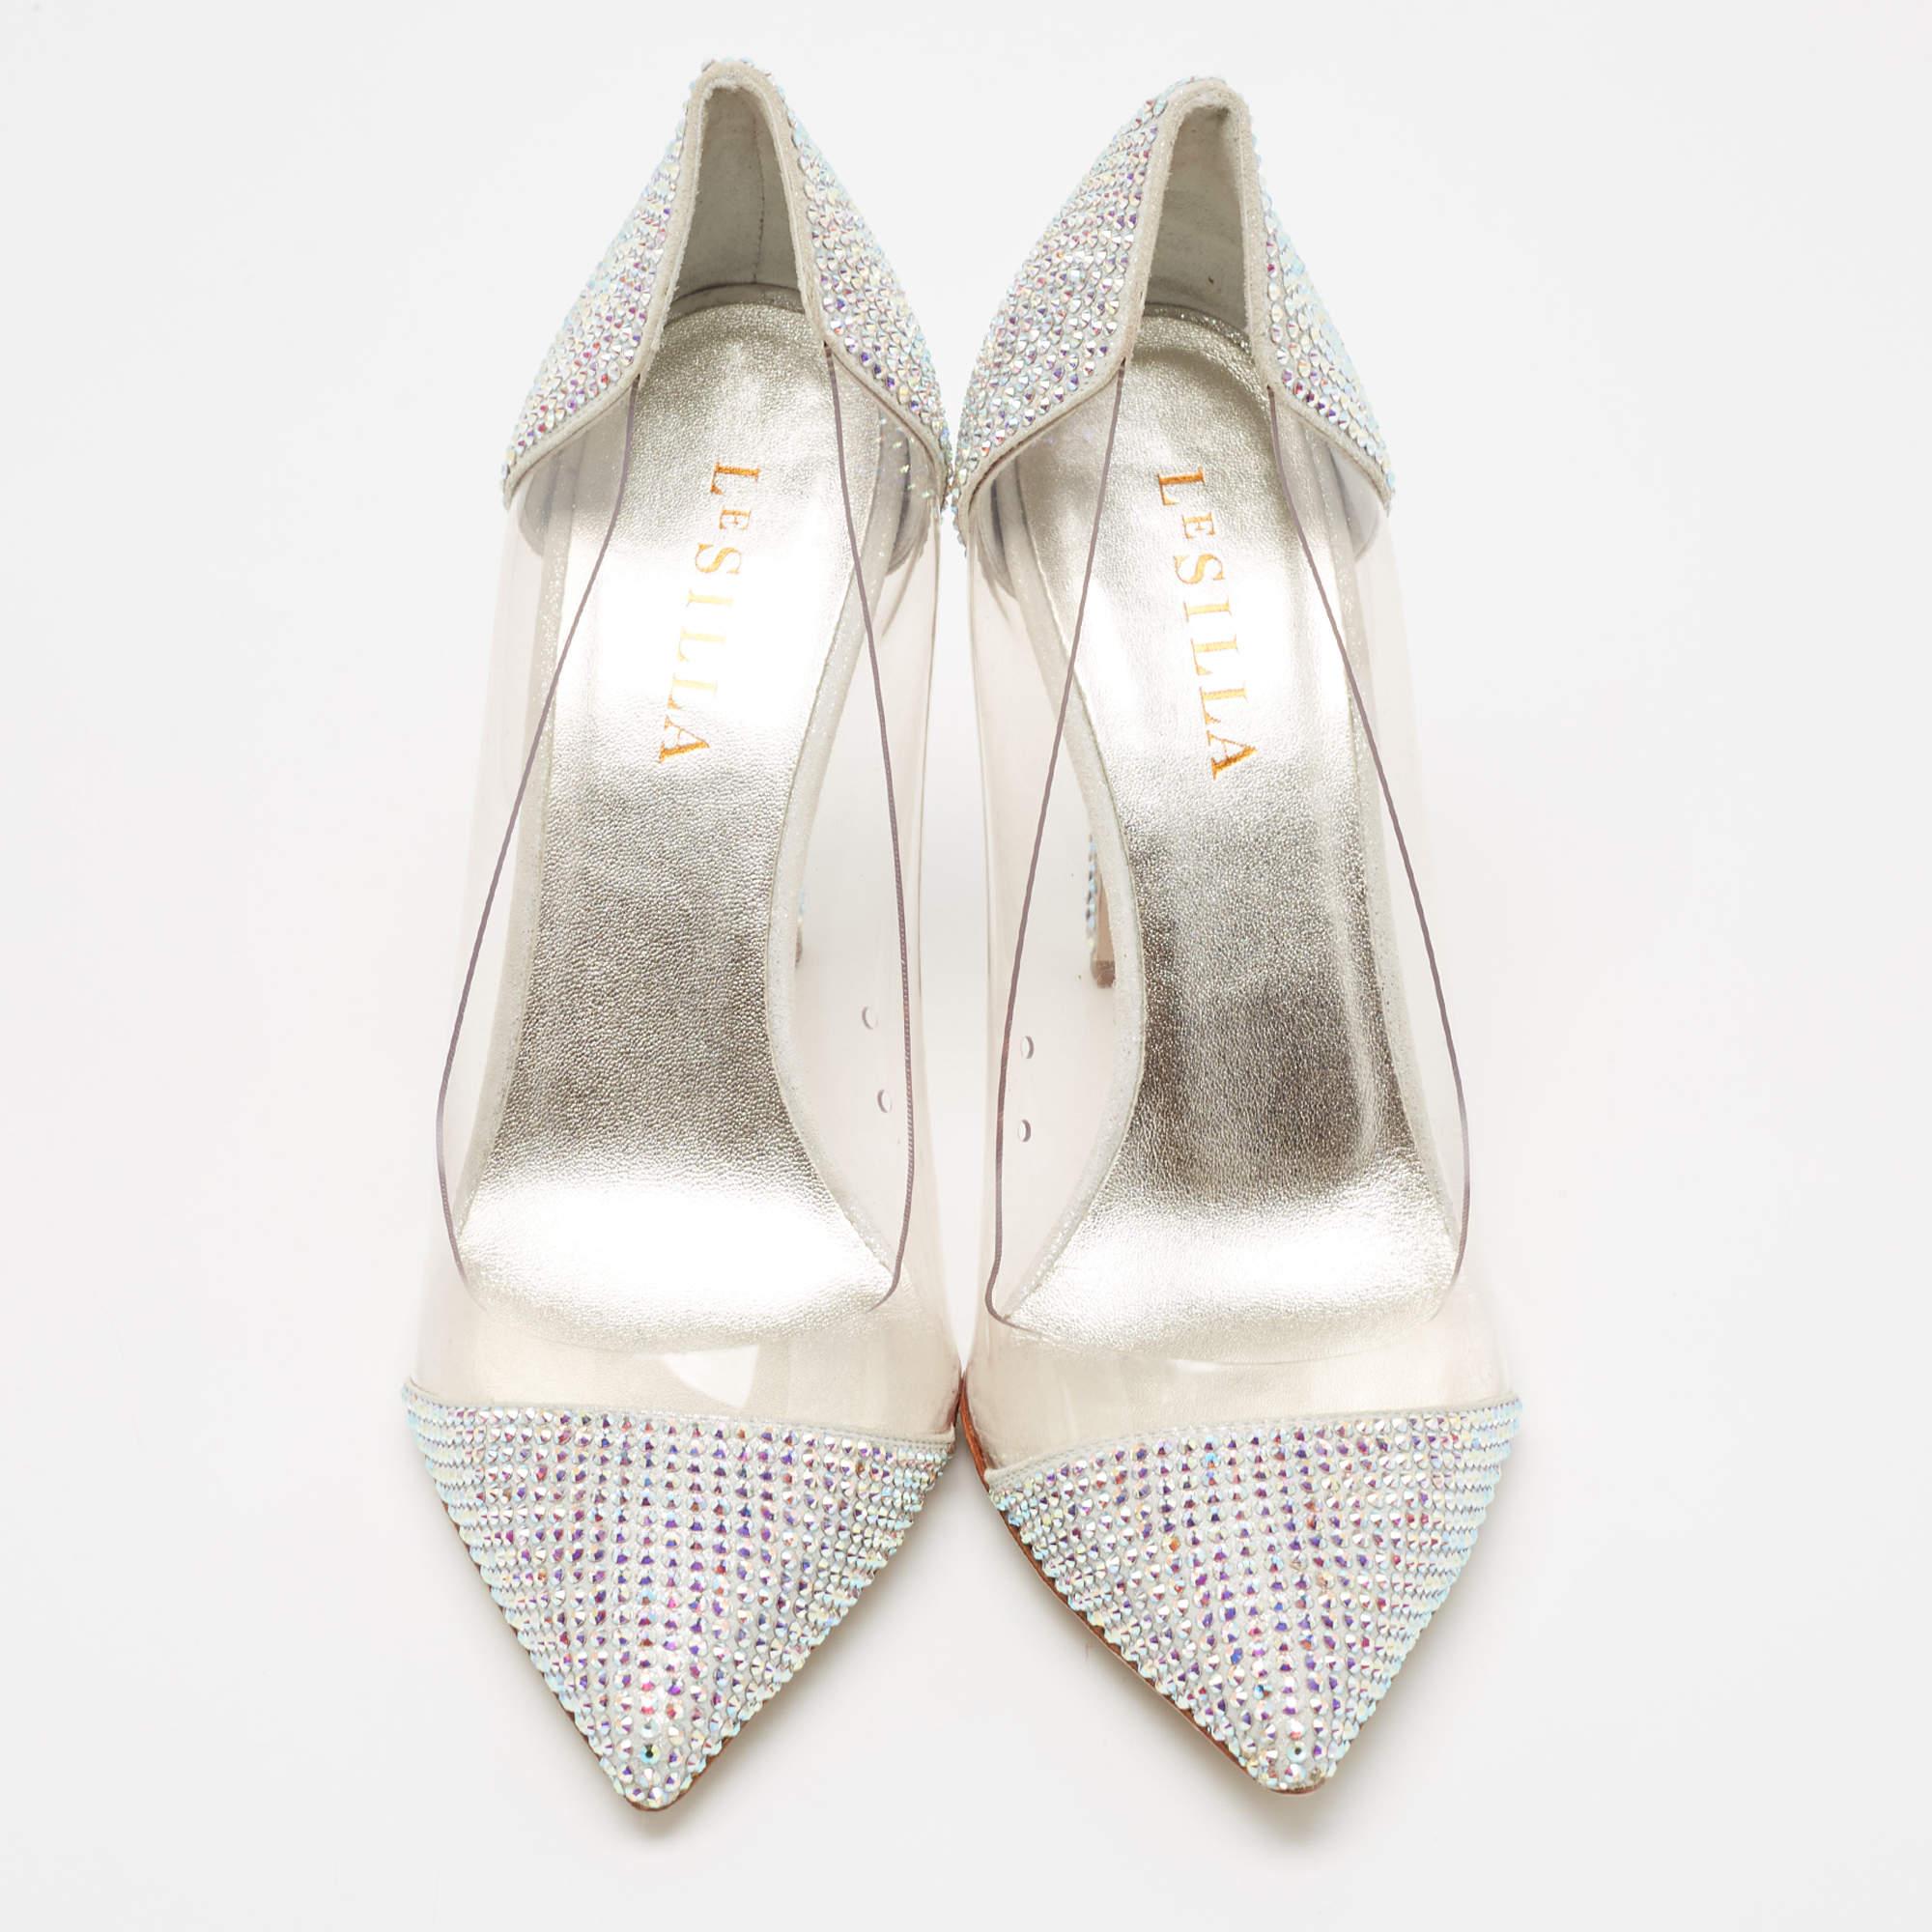 Le Silla Silver Suede and PVC Crystal Embellished Pumps Size 39.5 In Good Condition For Sale In Dubai, Al Qouz 2